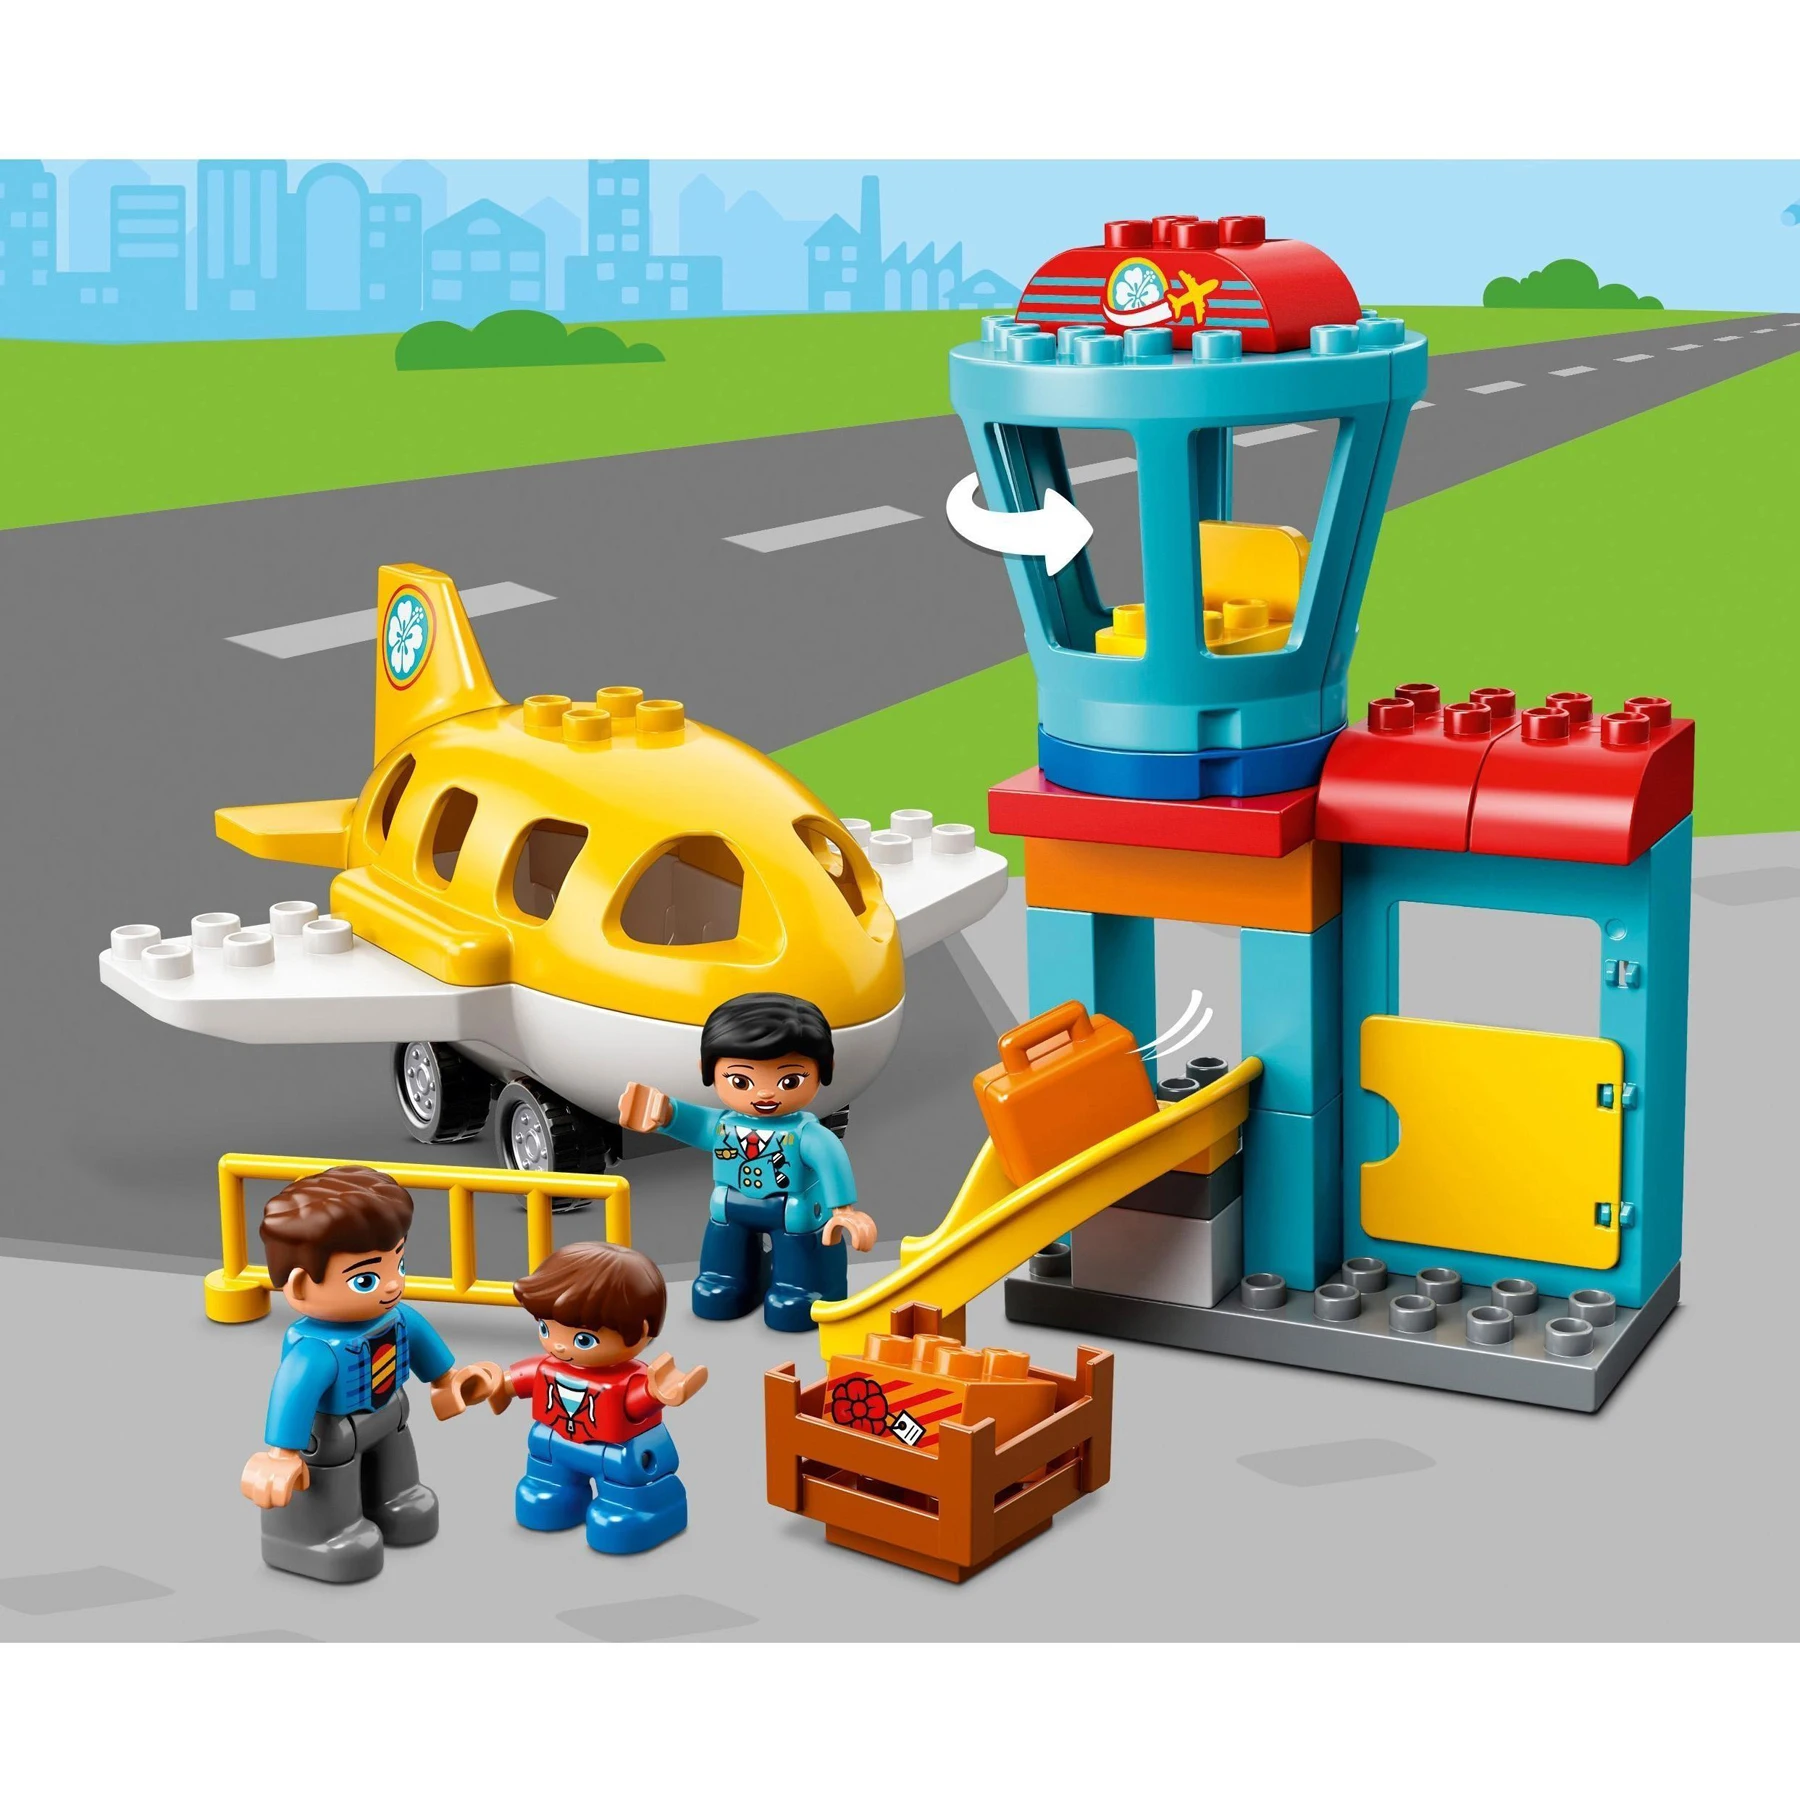 Designer Lego Duplo town 10871 Airport lego constructors, lego, lego for boys, gift for a boy, gifts for children, a gift, constructors, toys for boys, lego vehicles, cars, transport